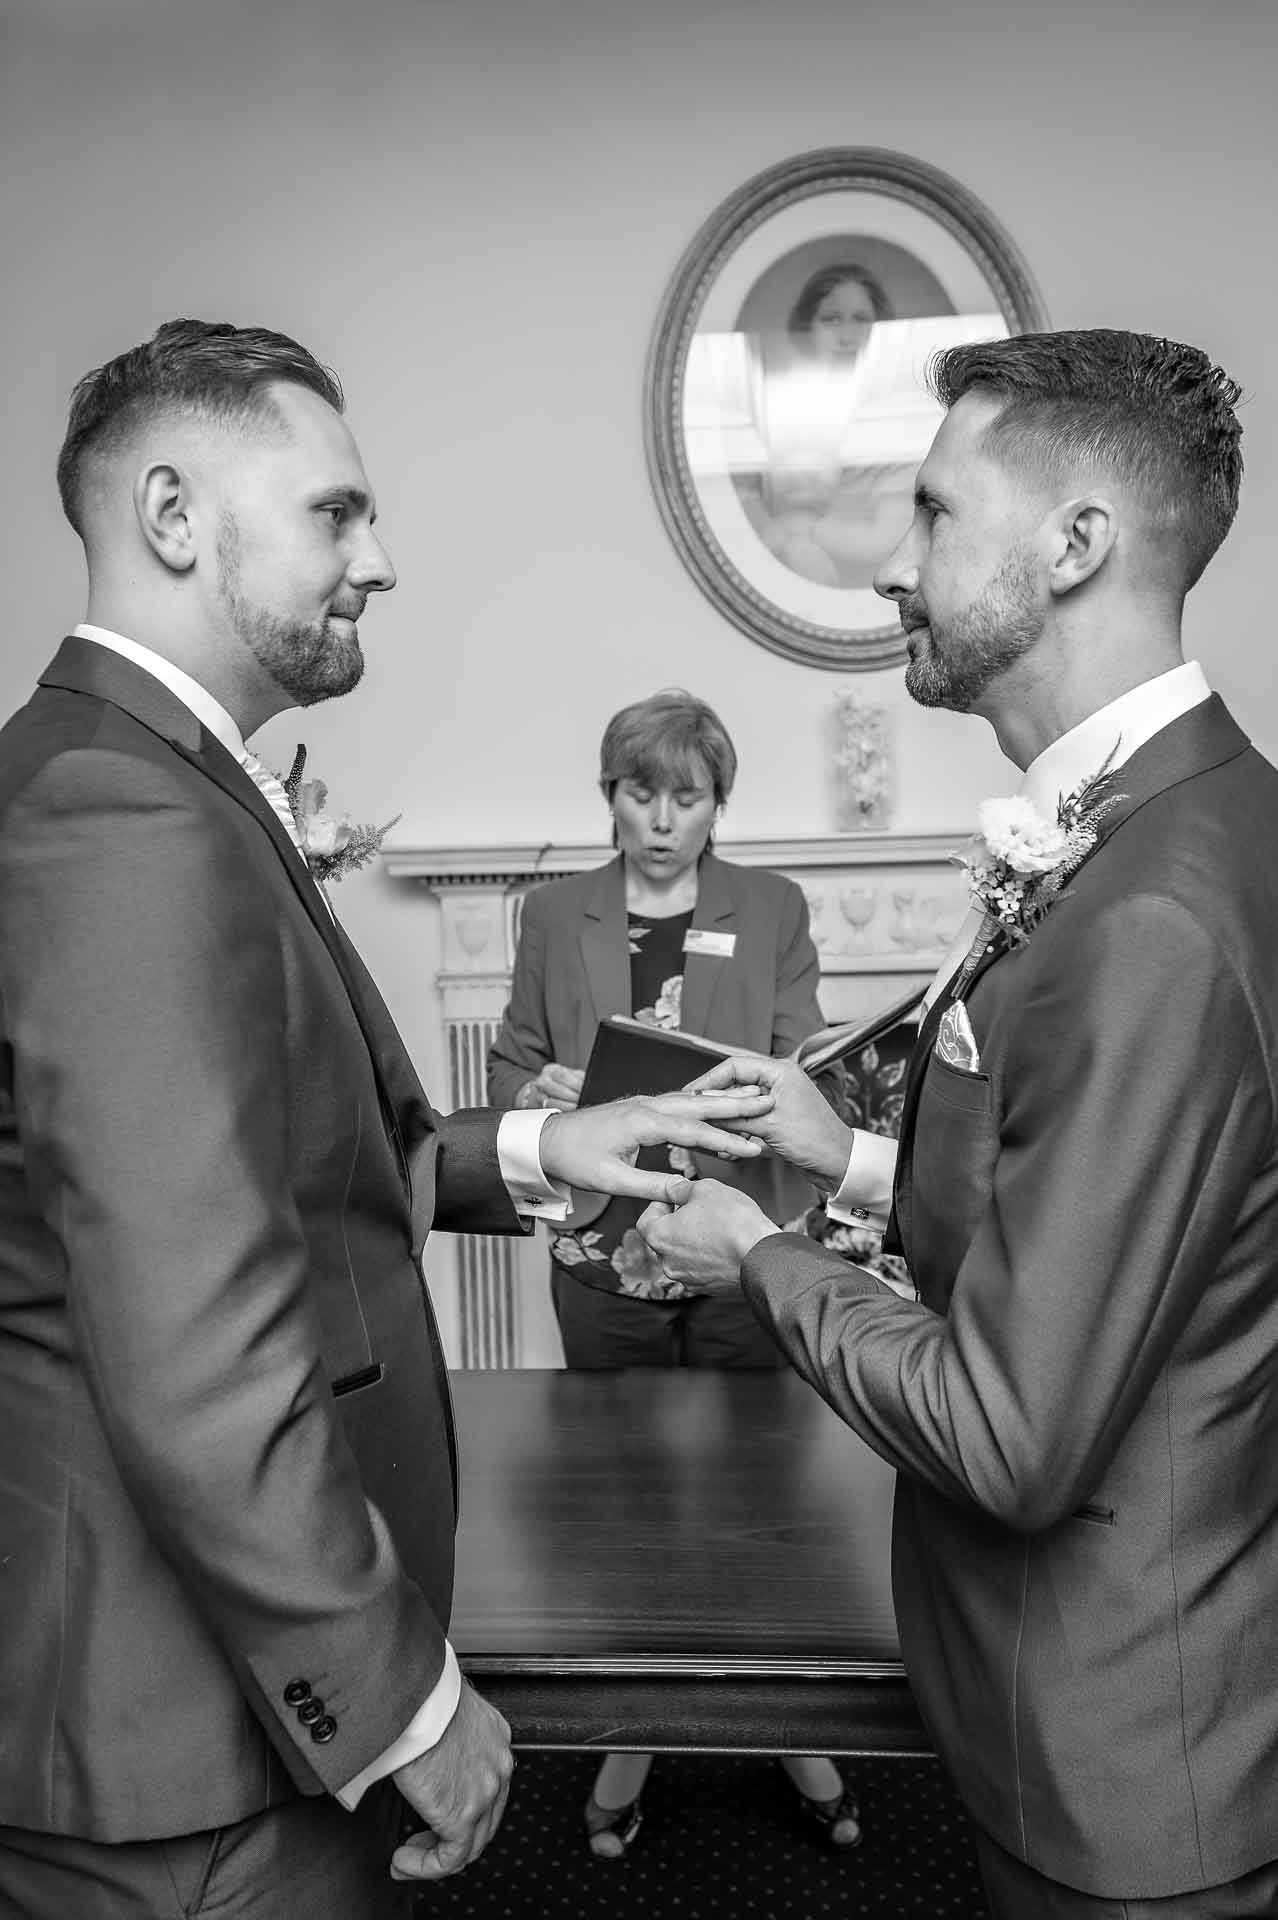 LGBT wedding with groom placing ring on his partner's finger maintaining good eye contact